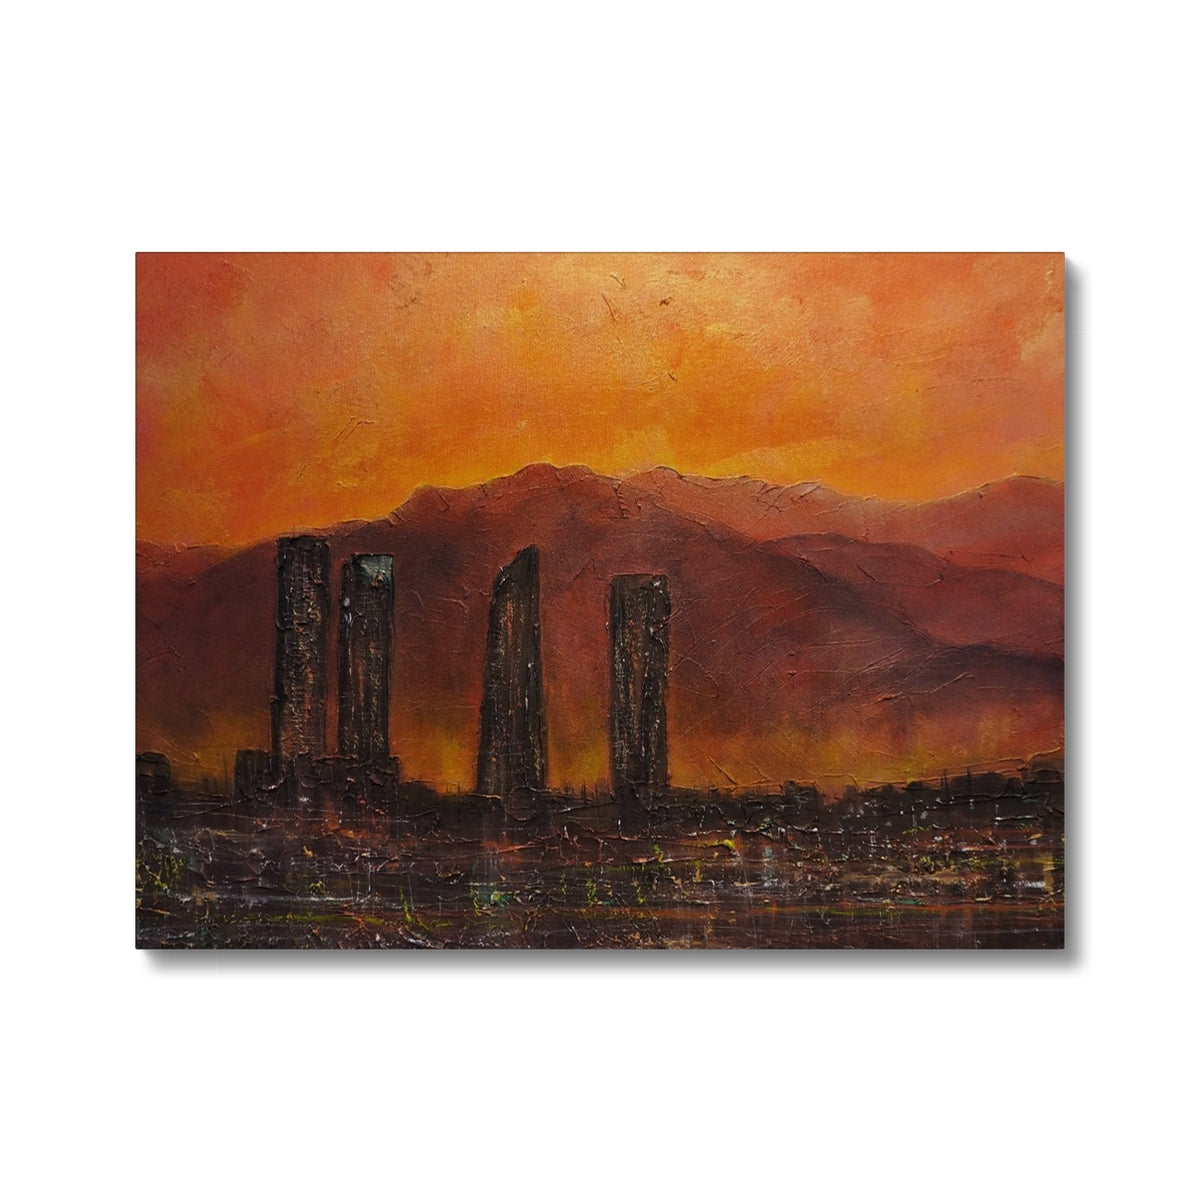 Madrid Dusk Painting | Canvas From Scotland-Contemporary Stretched Canvas Prints-World Art Gallery-24"x18"-Paintings, Prints, Homeware, Art Gifts From Scotland By Scottish Artist Kevin Hunter